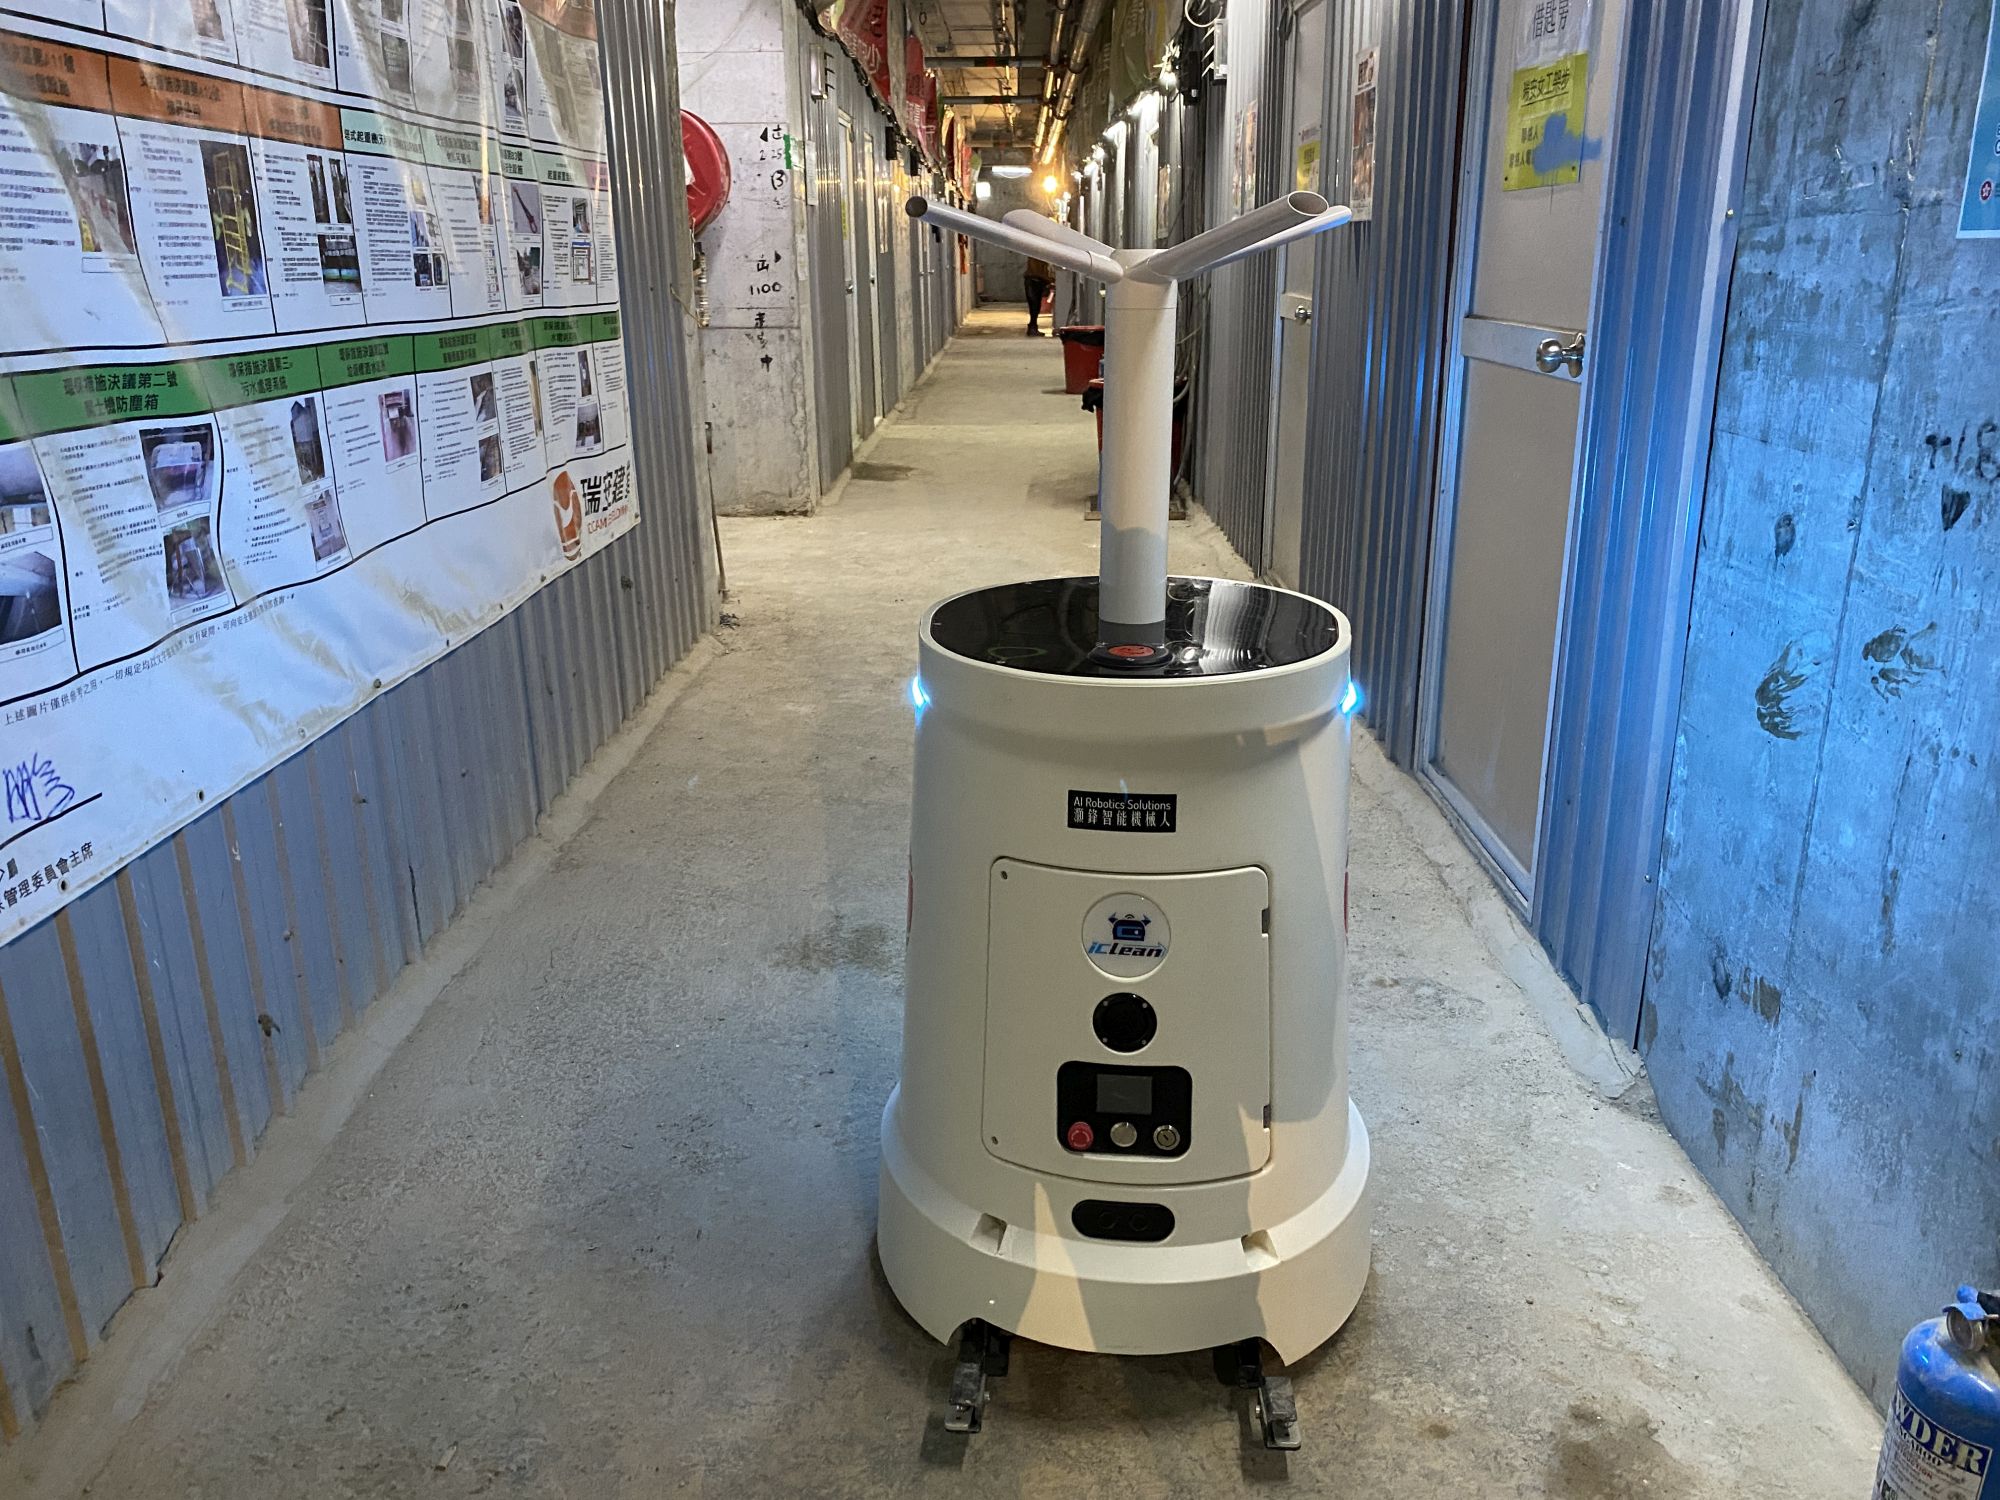 The air disinfection robot (Mist-bot) in the picture disinfects the construction site area and workers’ canteen on a regular basis.